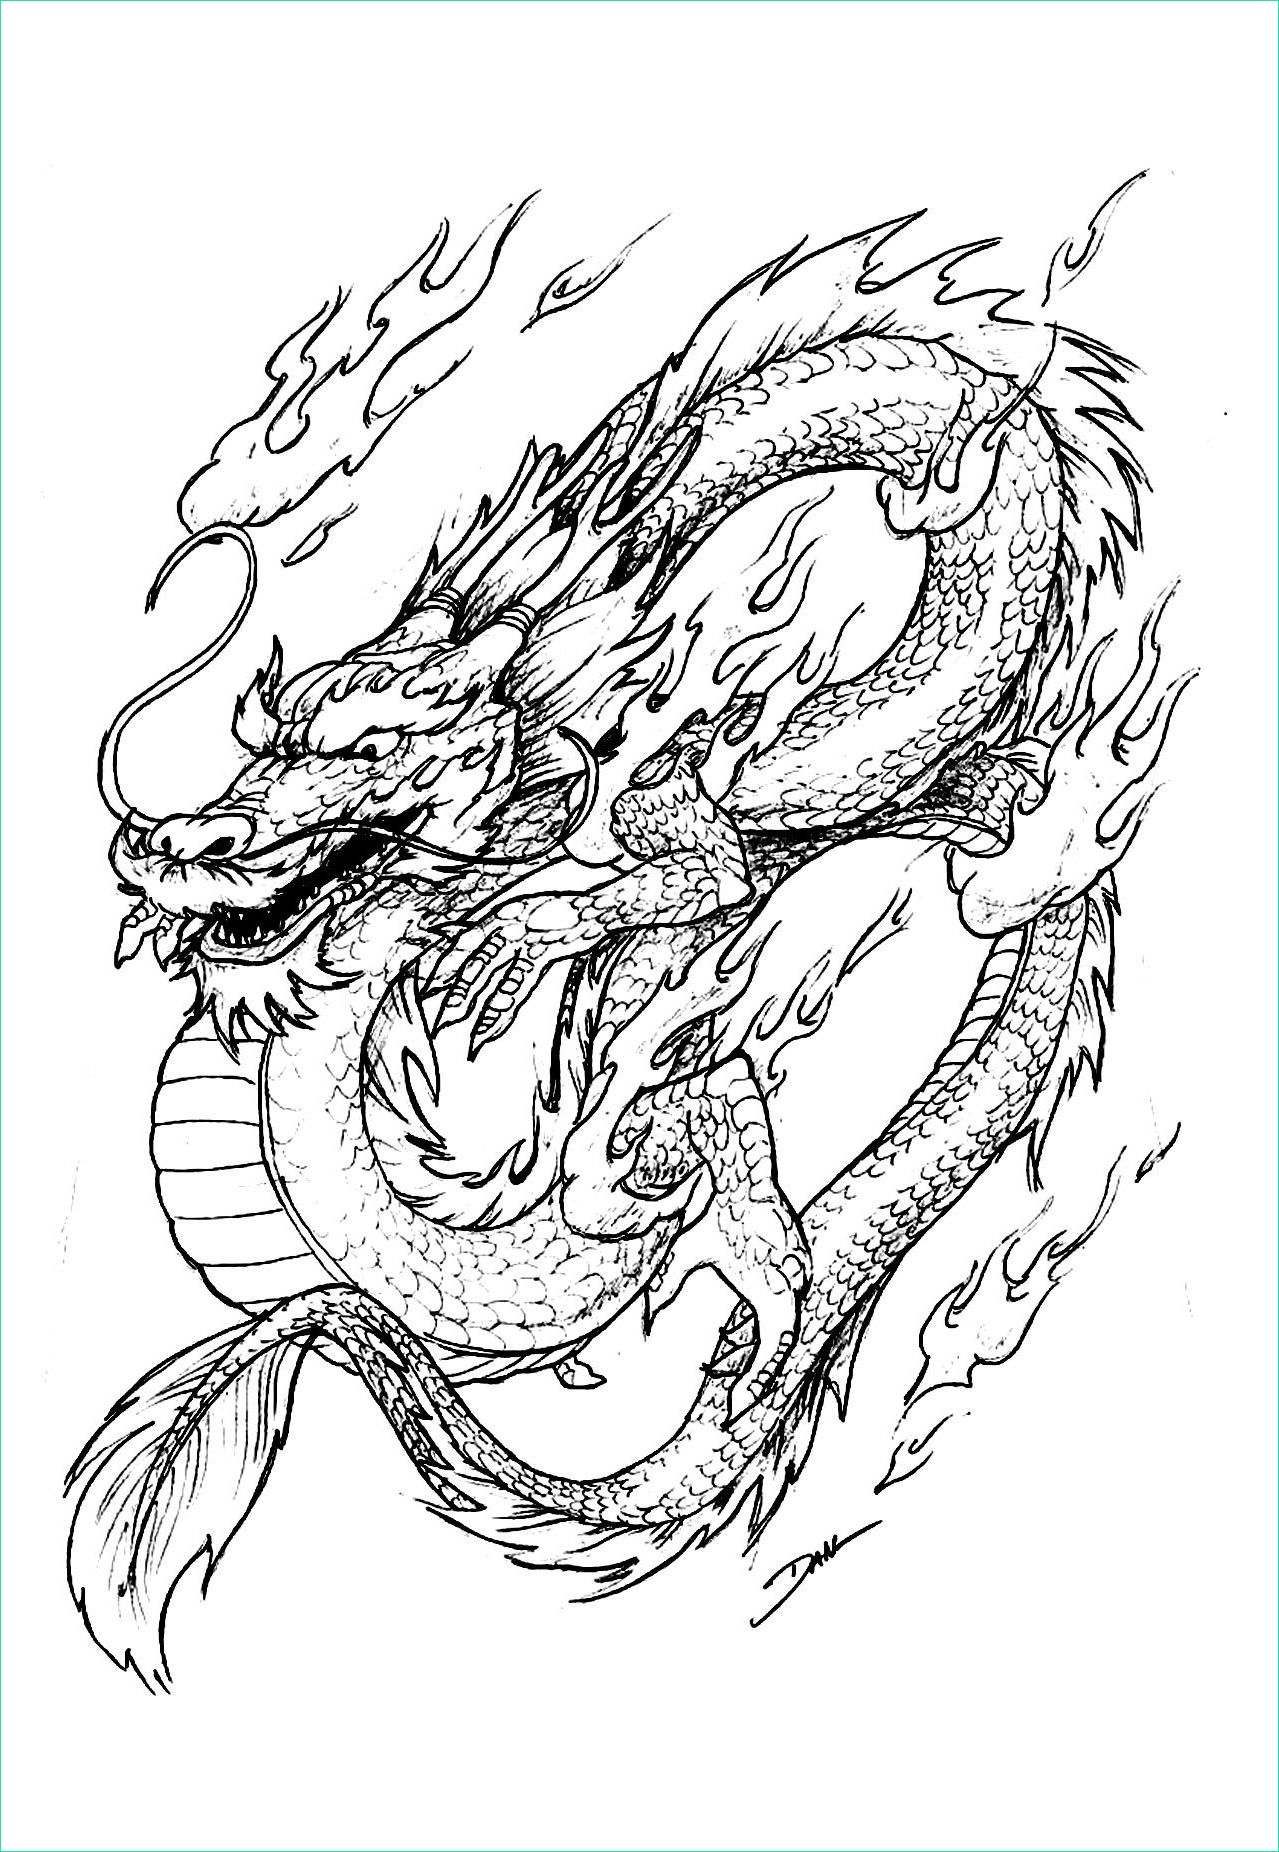 Dragon Chinois Coloriage Beau Collection Free Coloring Page Coloring Page Chinese Dragon Dragon